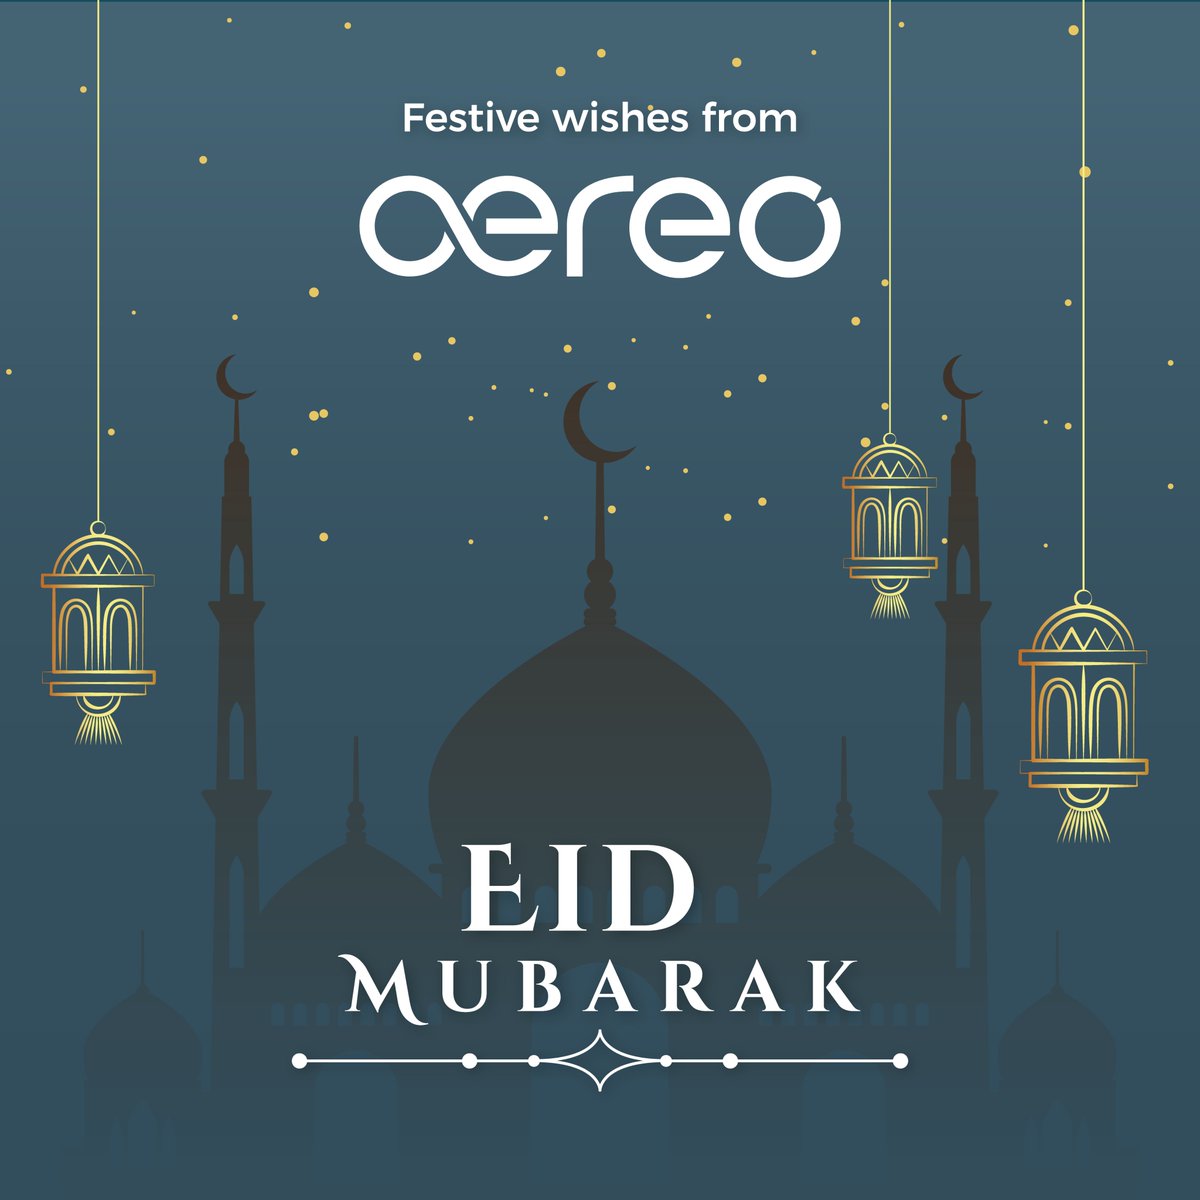 After a month of reflection and resilience, we come together to celebrate the spirit of Ramadan and embrace the blessings of Eid al-Fitr. 🌙

Team #Aereo extends heartfelt wishes for a joyous Eid filled with peace, love and blessings for you and your loved ones. Eid Mubarak! 🕌✨